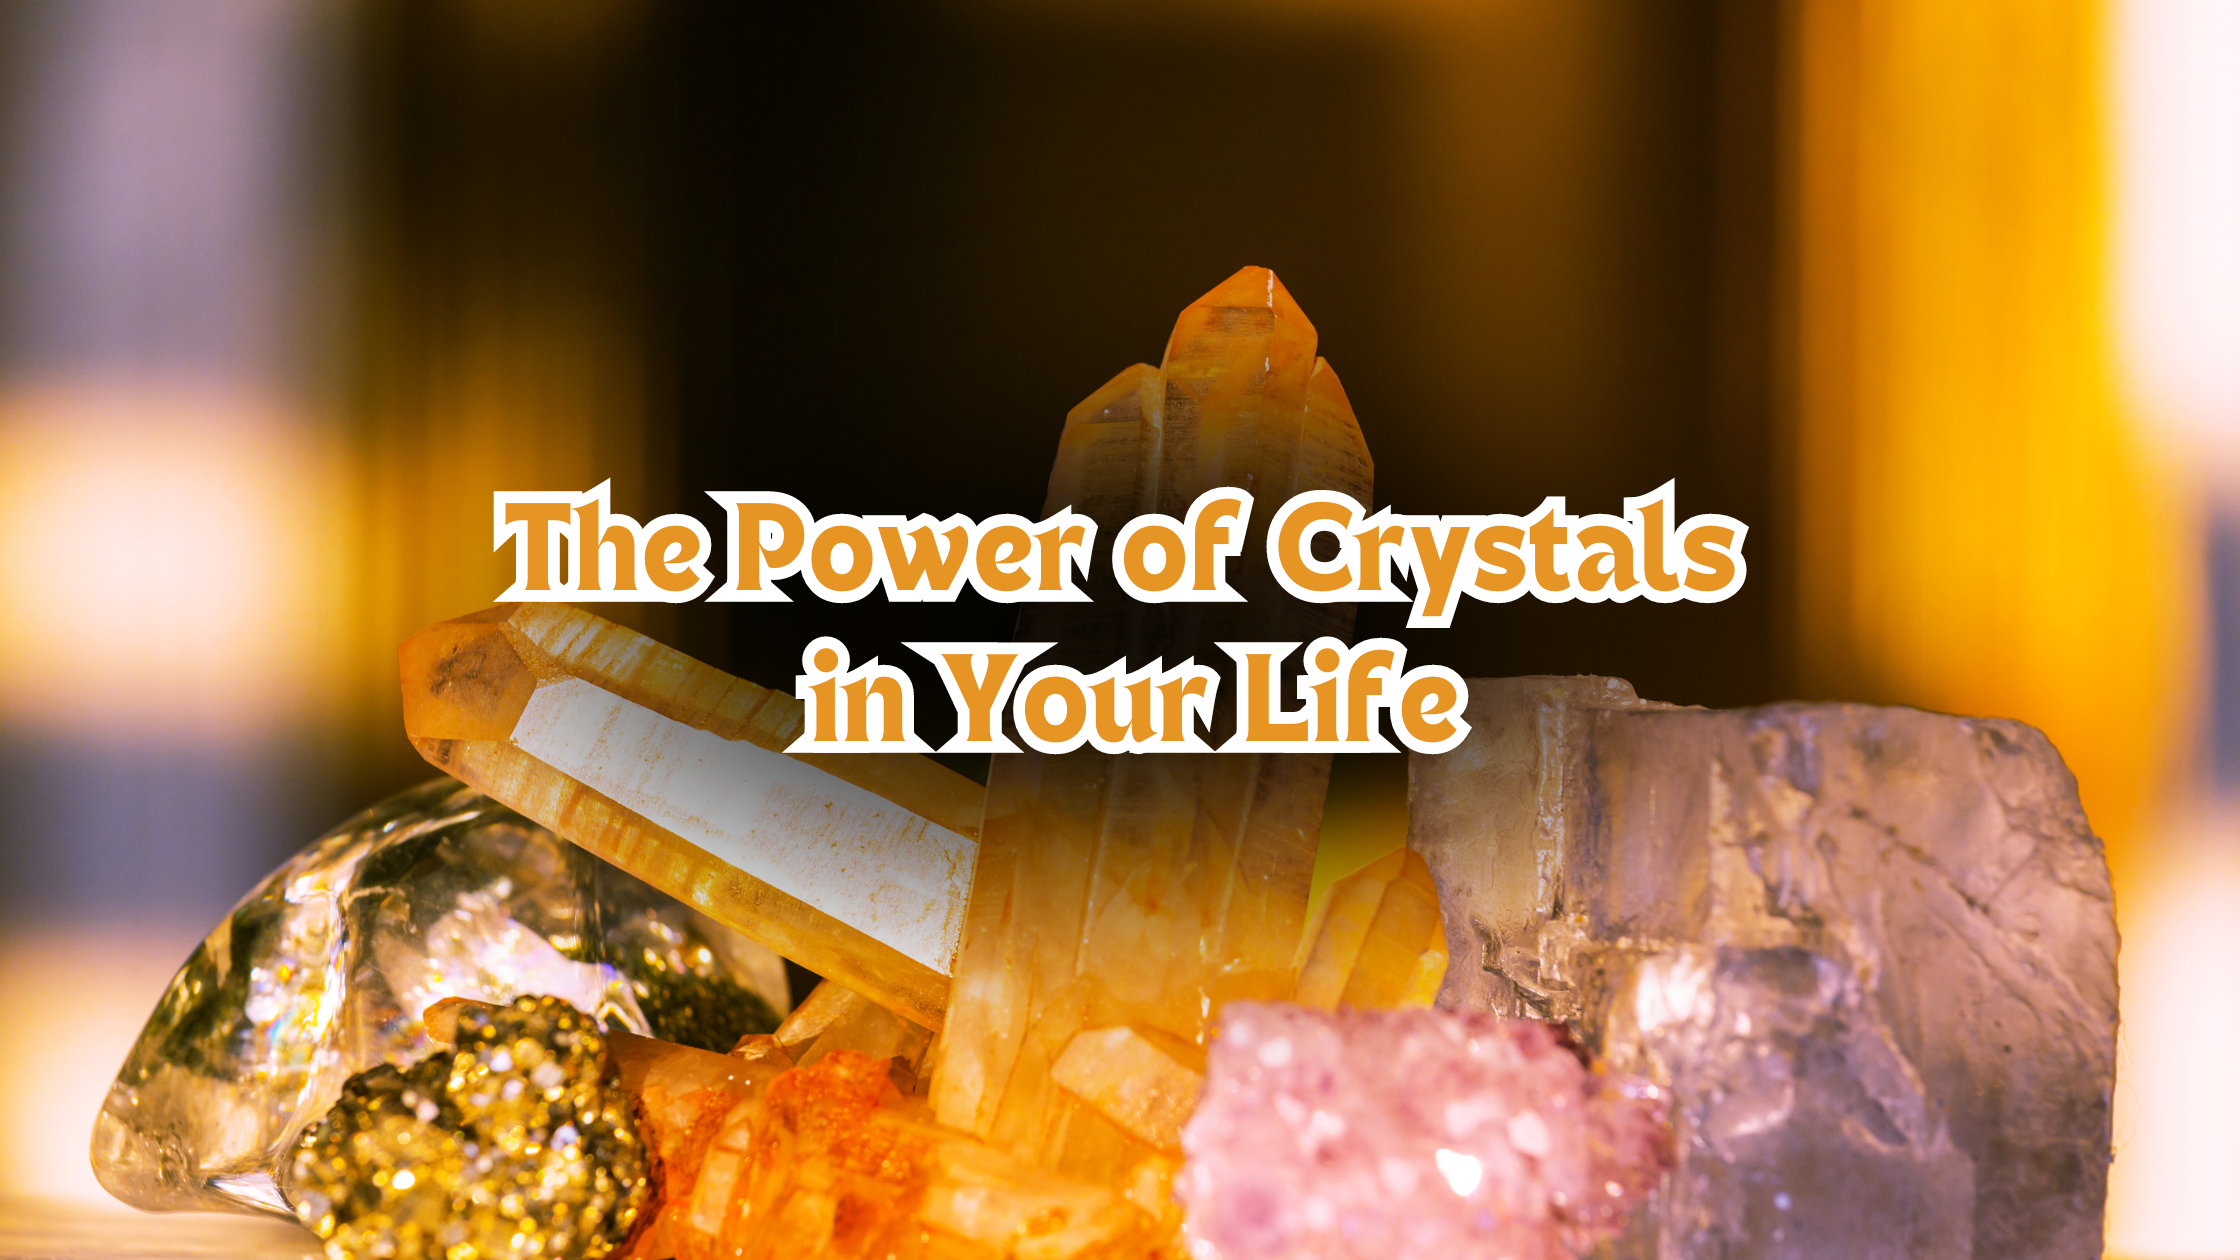 The Power of Crystals in Your Life